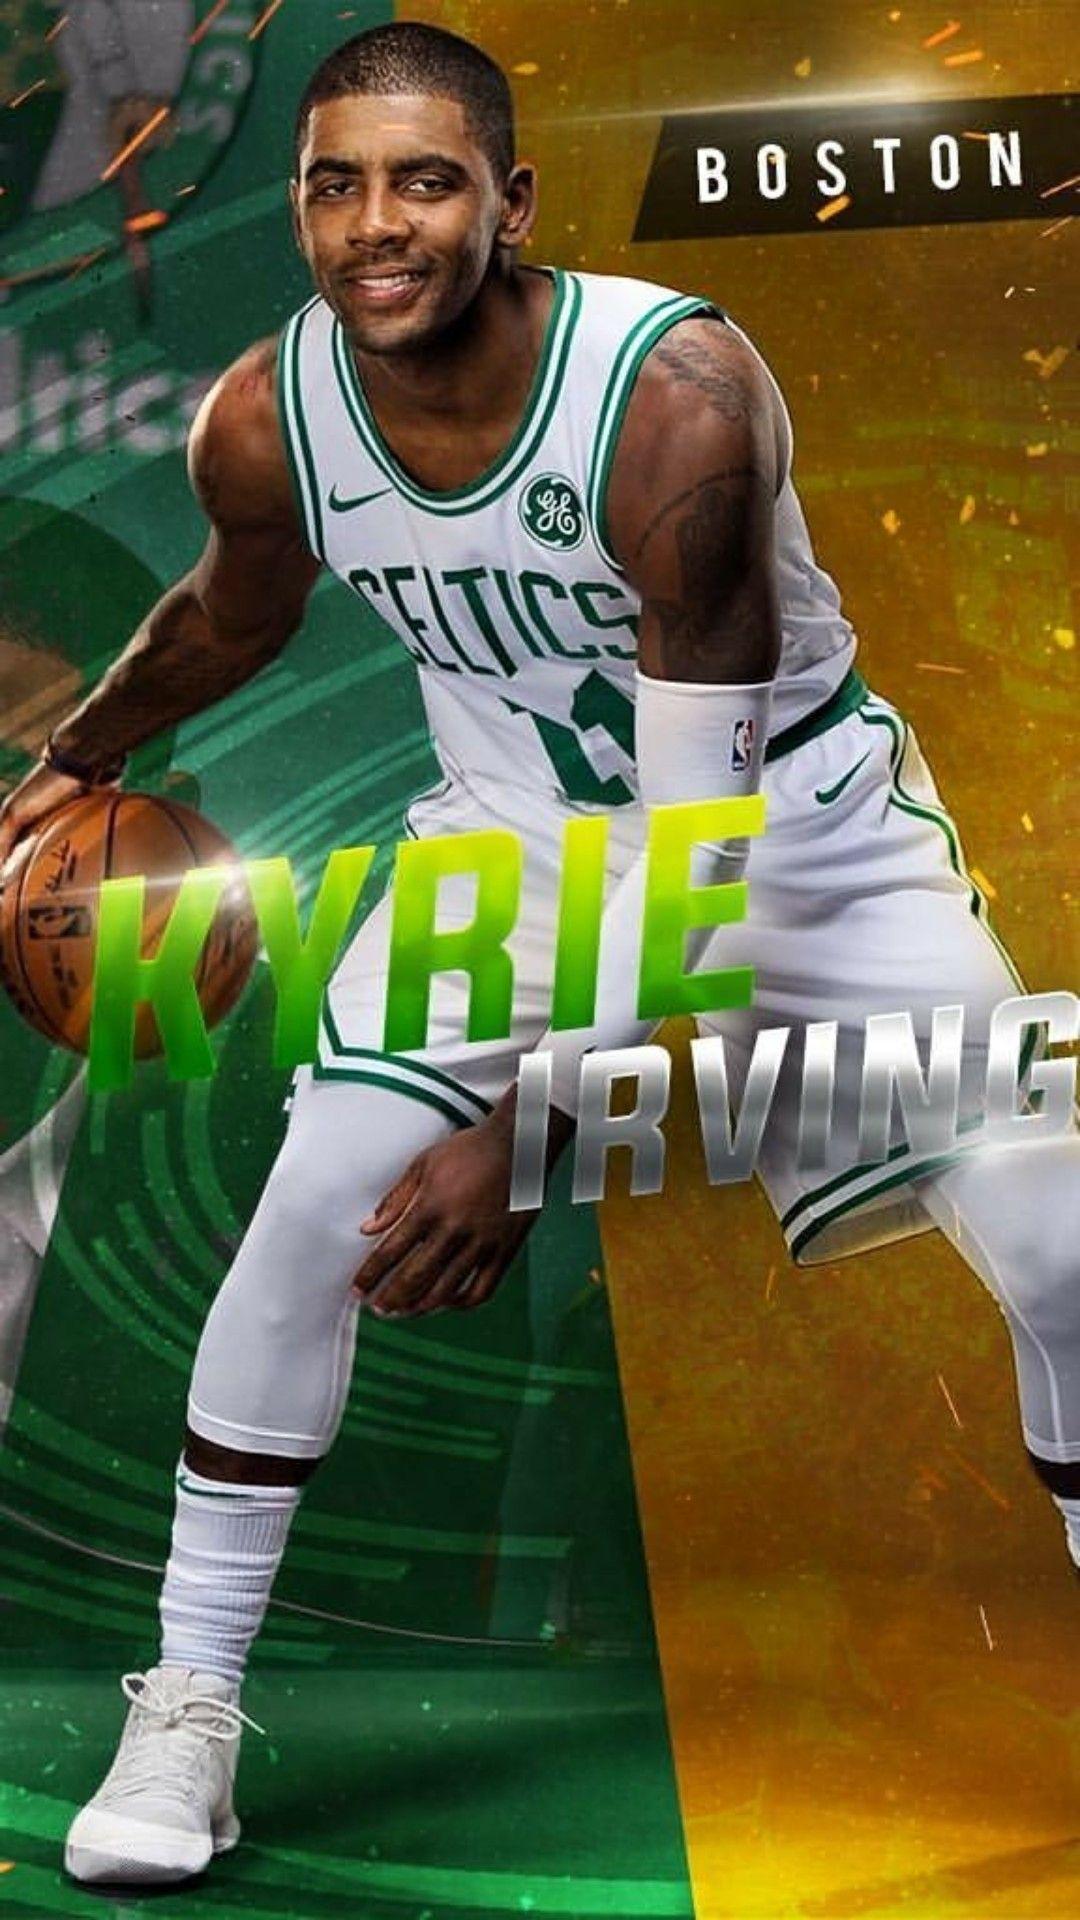 Kyrie Irving 2019 Wallpapers Wallpaper Cave